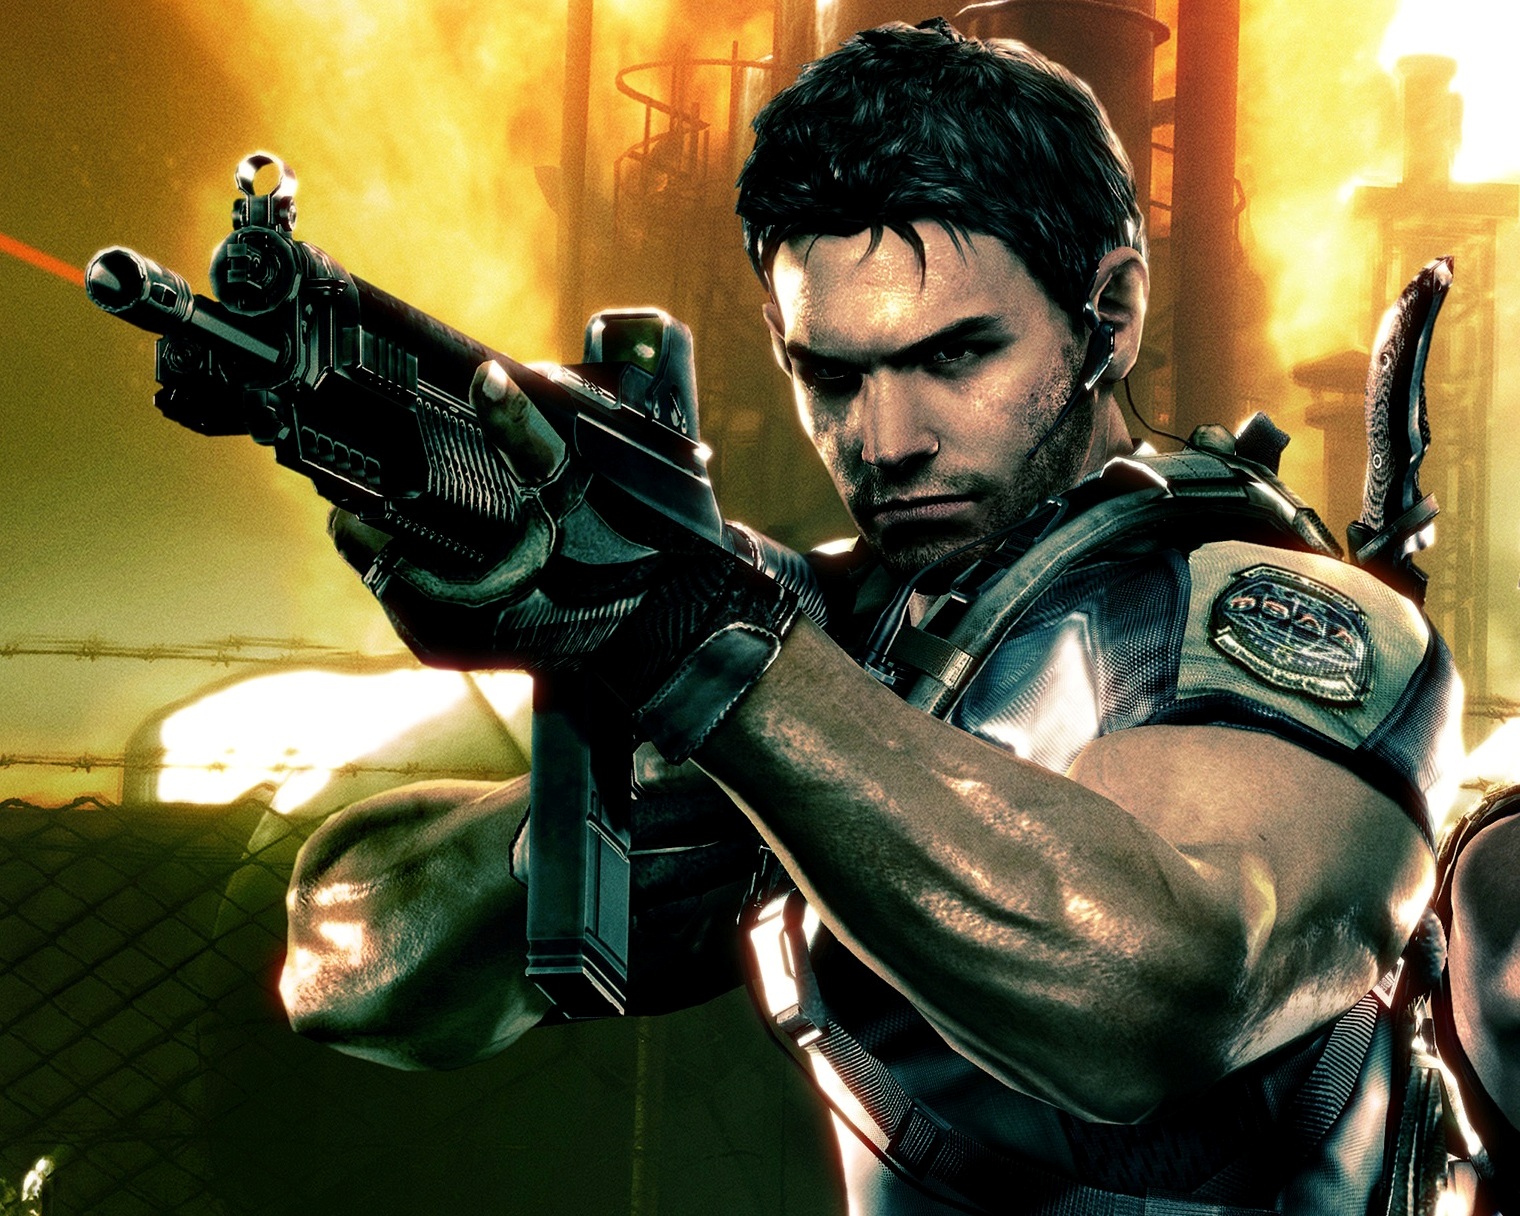 Resident Evil 5 free Wallpapers 40 photos for your desktop